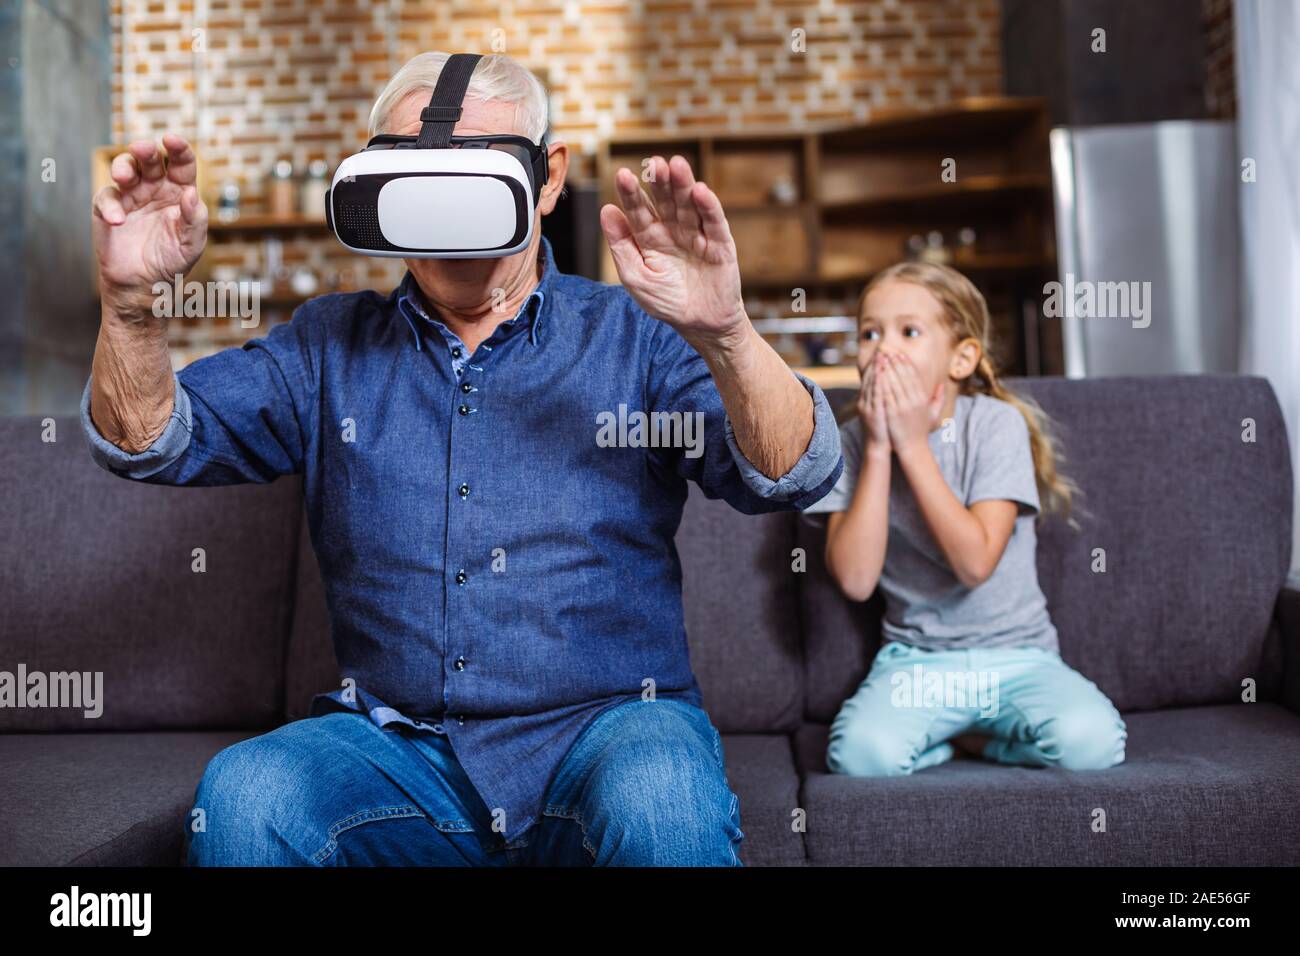 Pleasant aged man using vr device Stock Photo